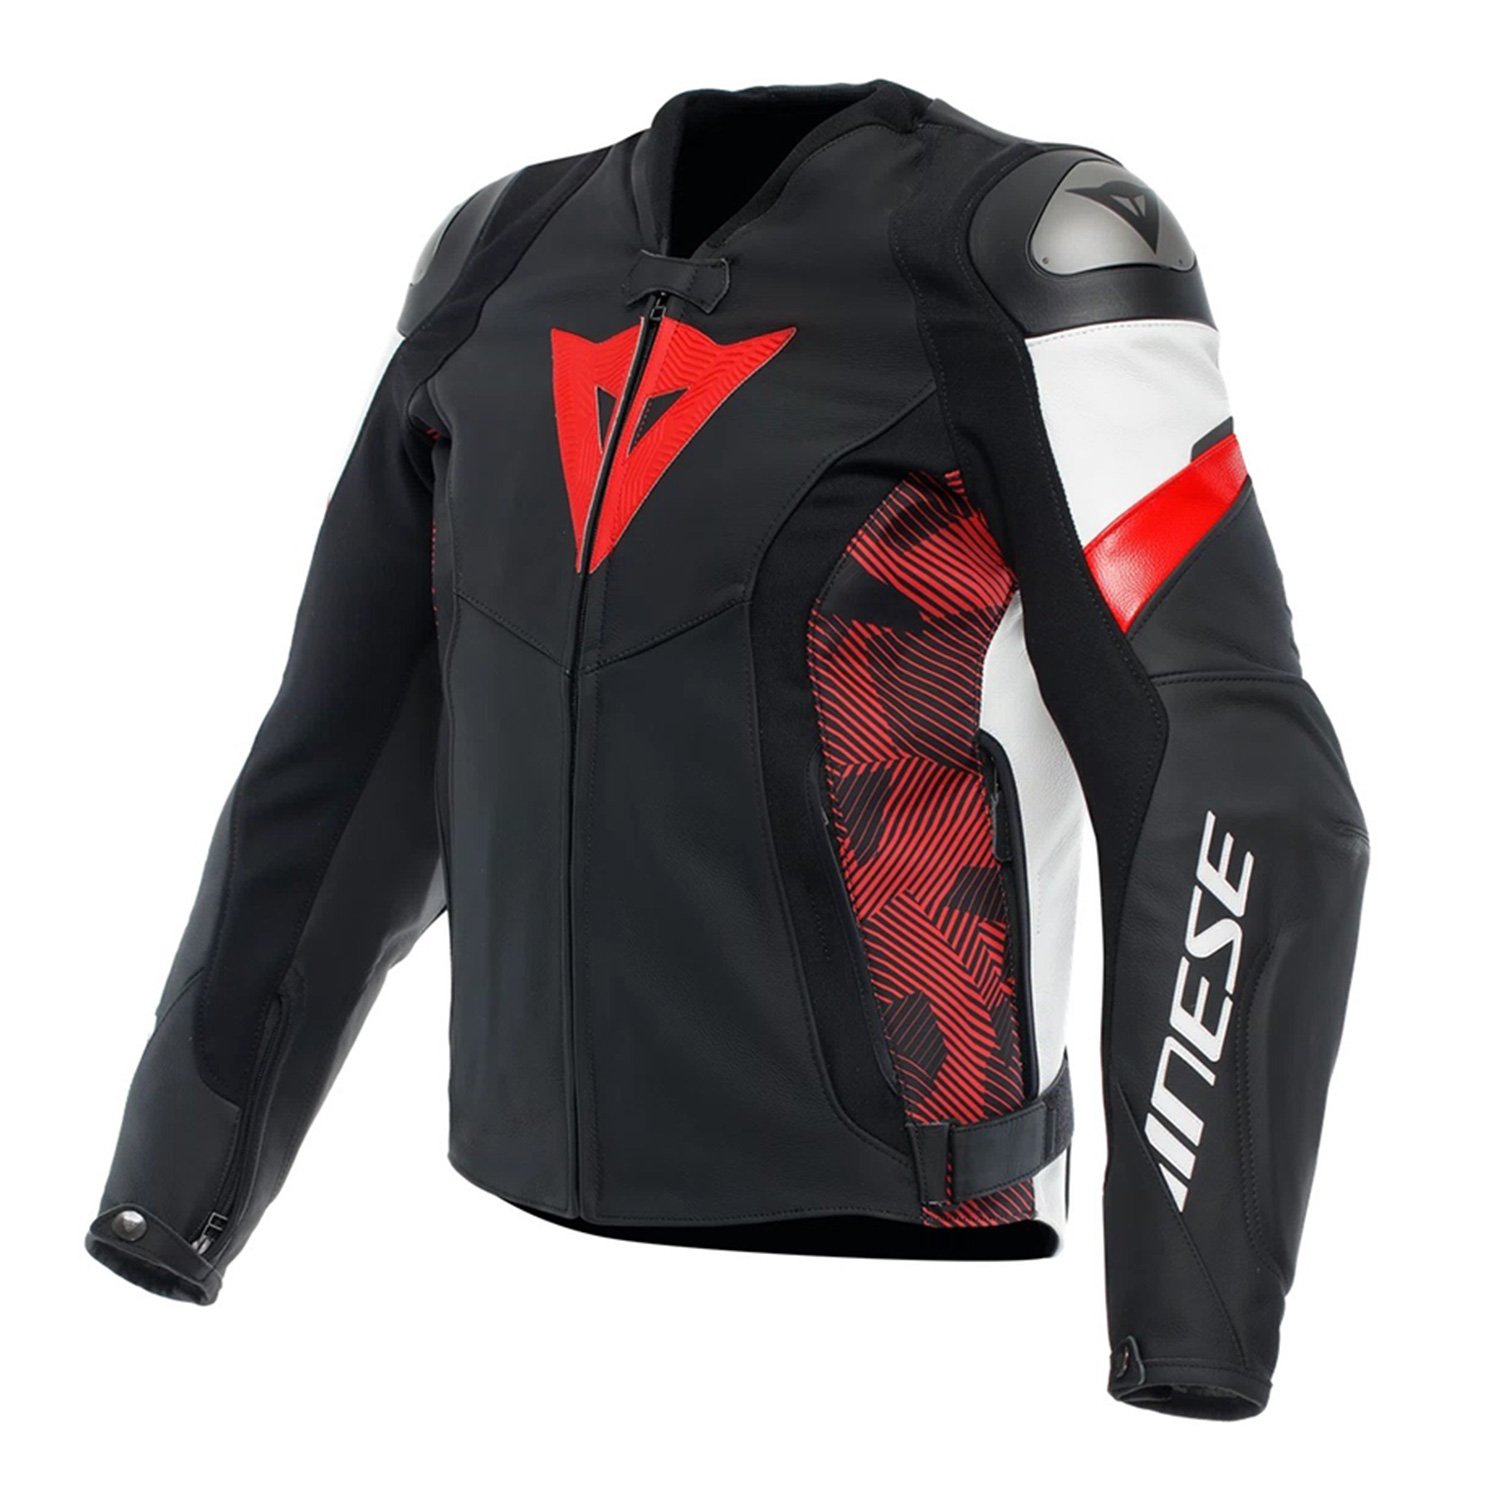 Image of Dainese Avro Leather 5 Jacket Black Red Lava White Size 46 ID 8051019639615